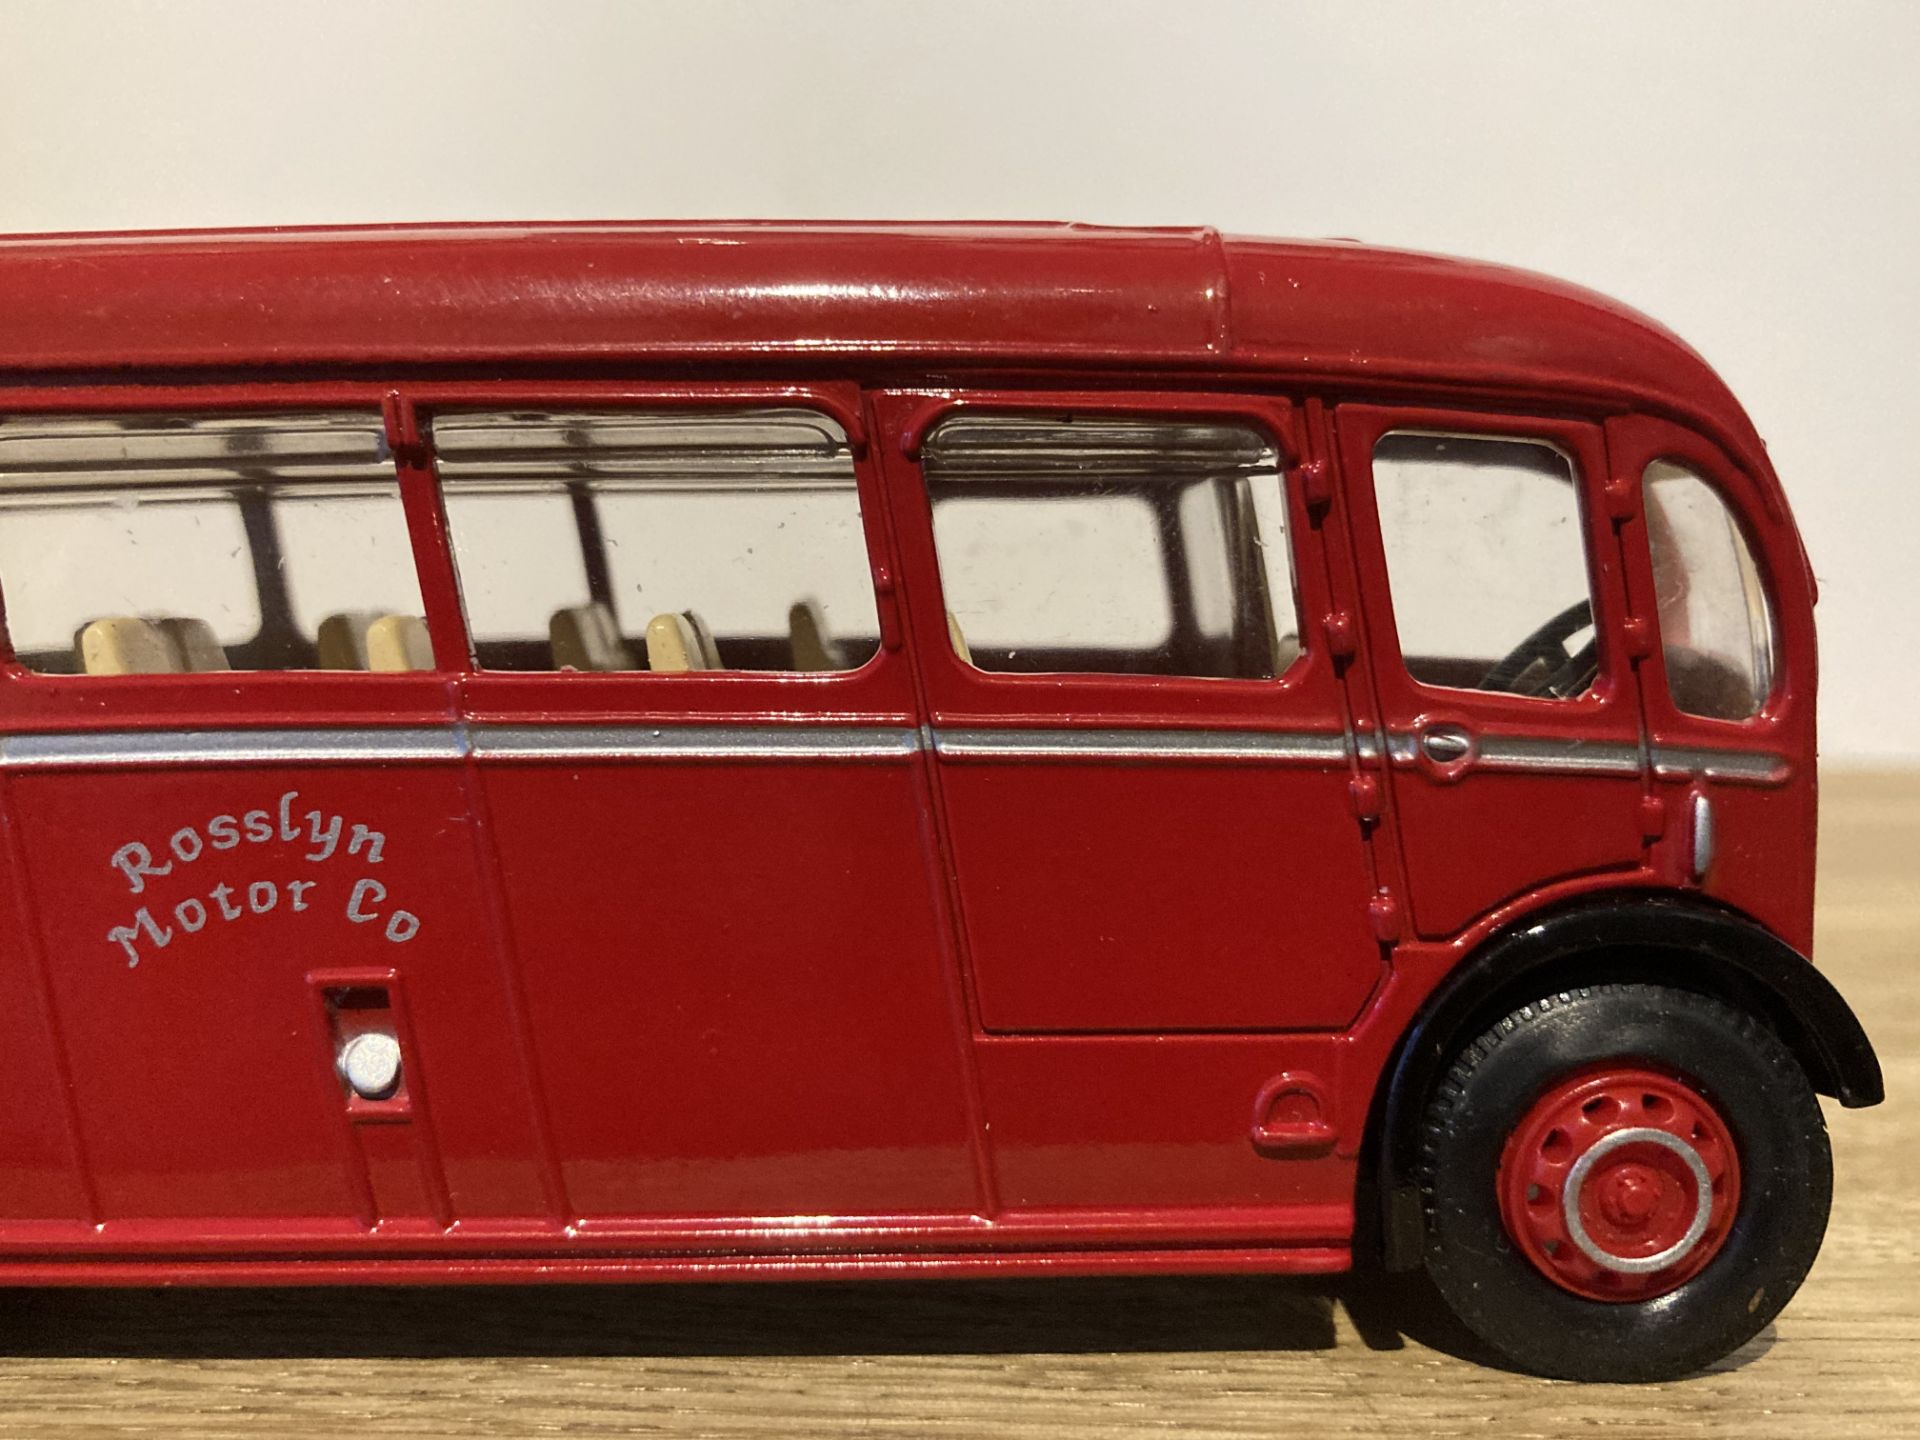 Limited Edition Corgi Rosslyn Motor Co, The AEC Regal - Image 10 of 13